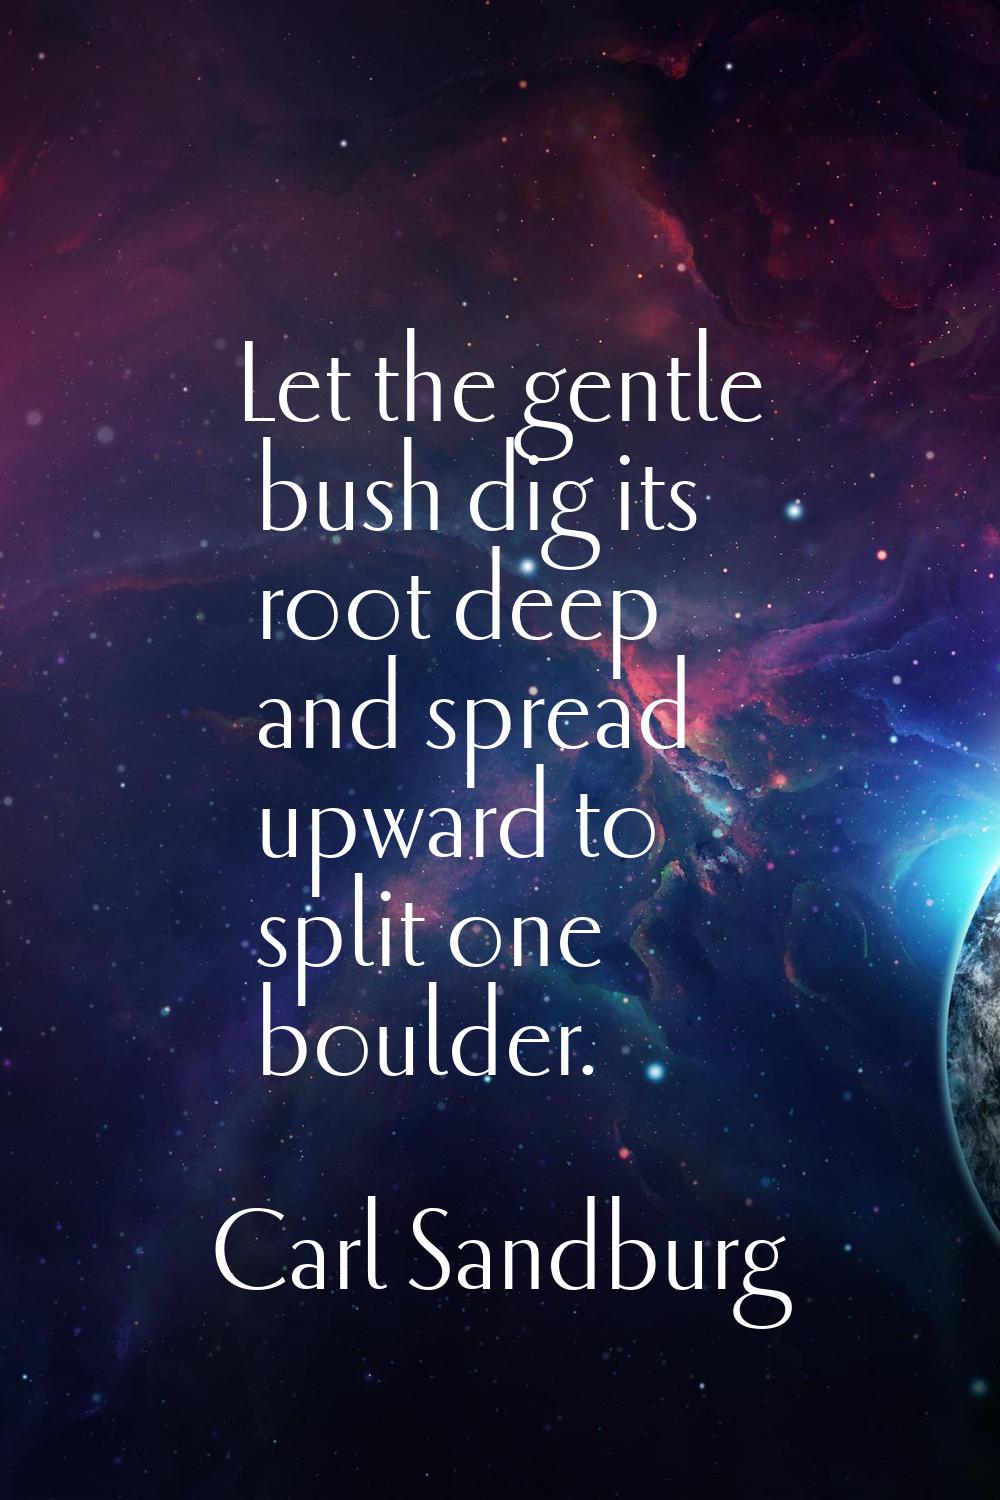 Let the gentle bush dig its root deep and spread upward to split one boulder.